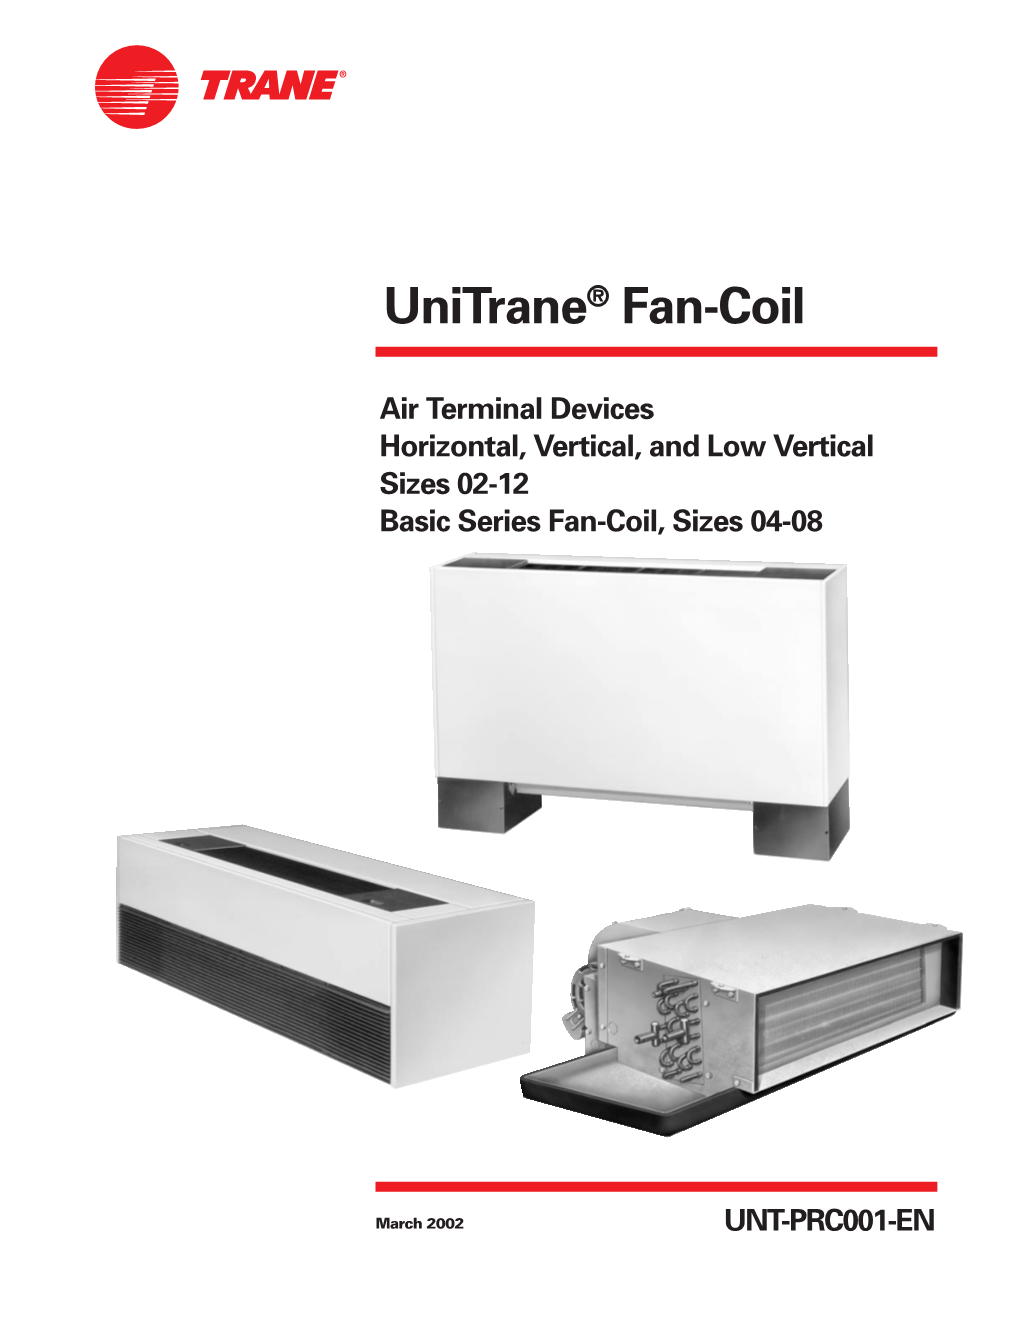 Unitrane Fan-Coil As an • the Random Start-Up Feature Helps Being Placed on Top of the Units